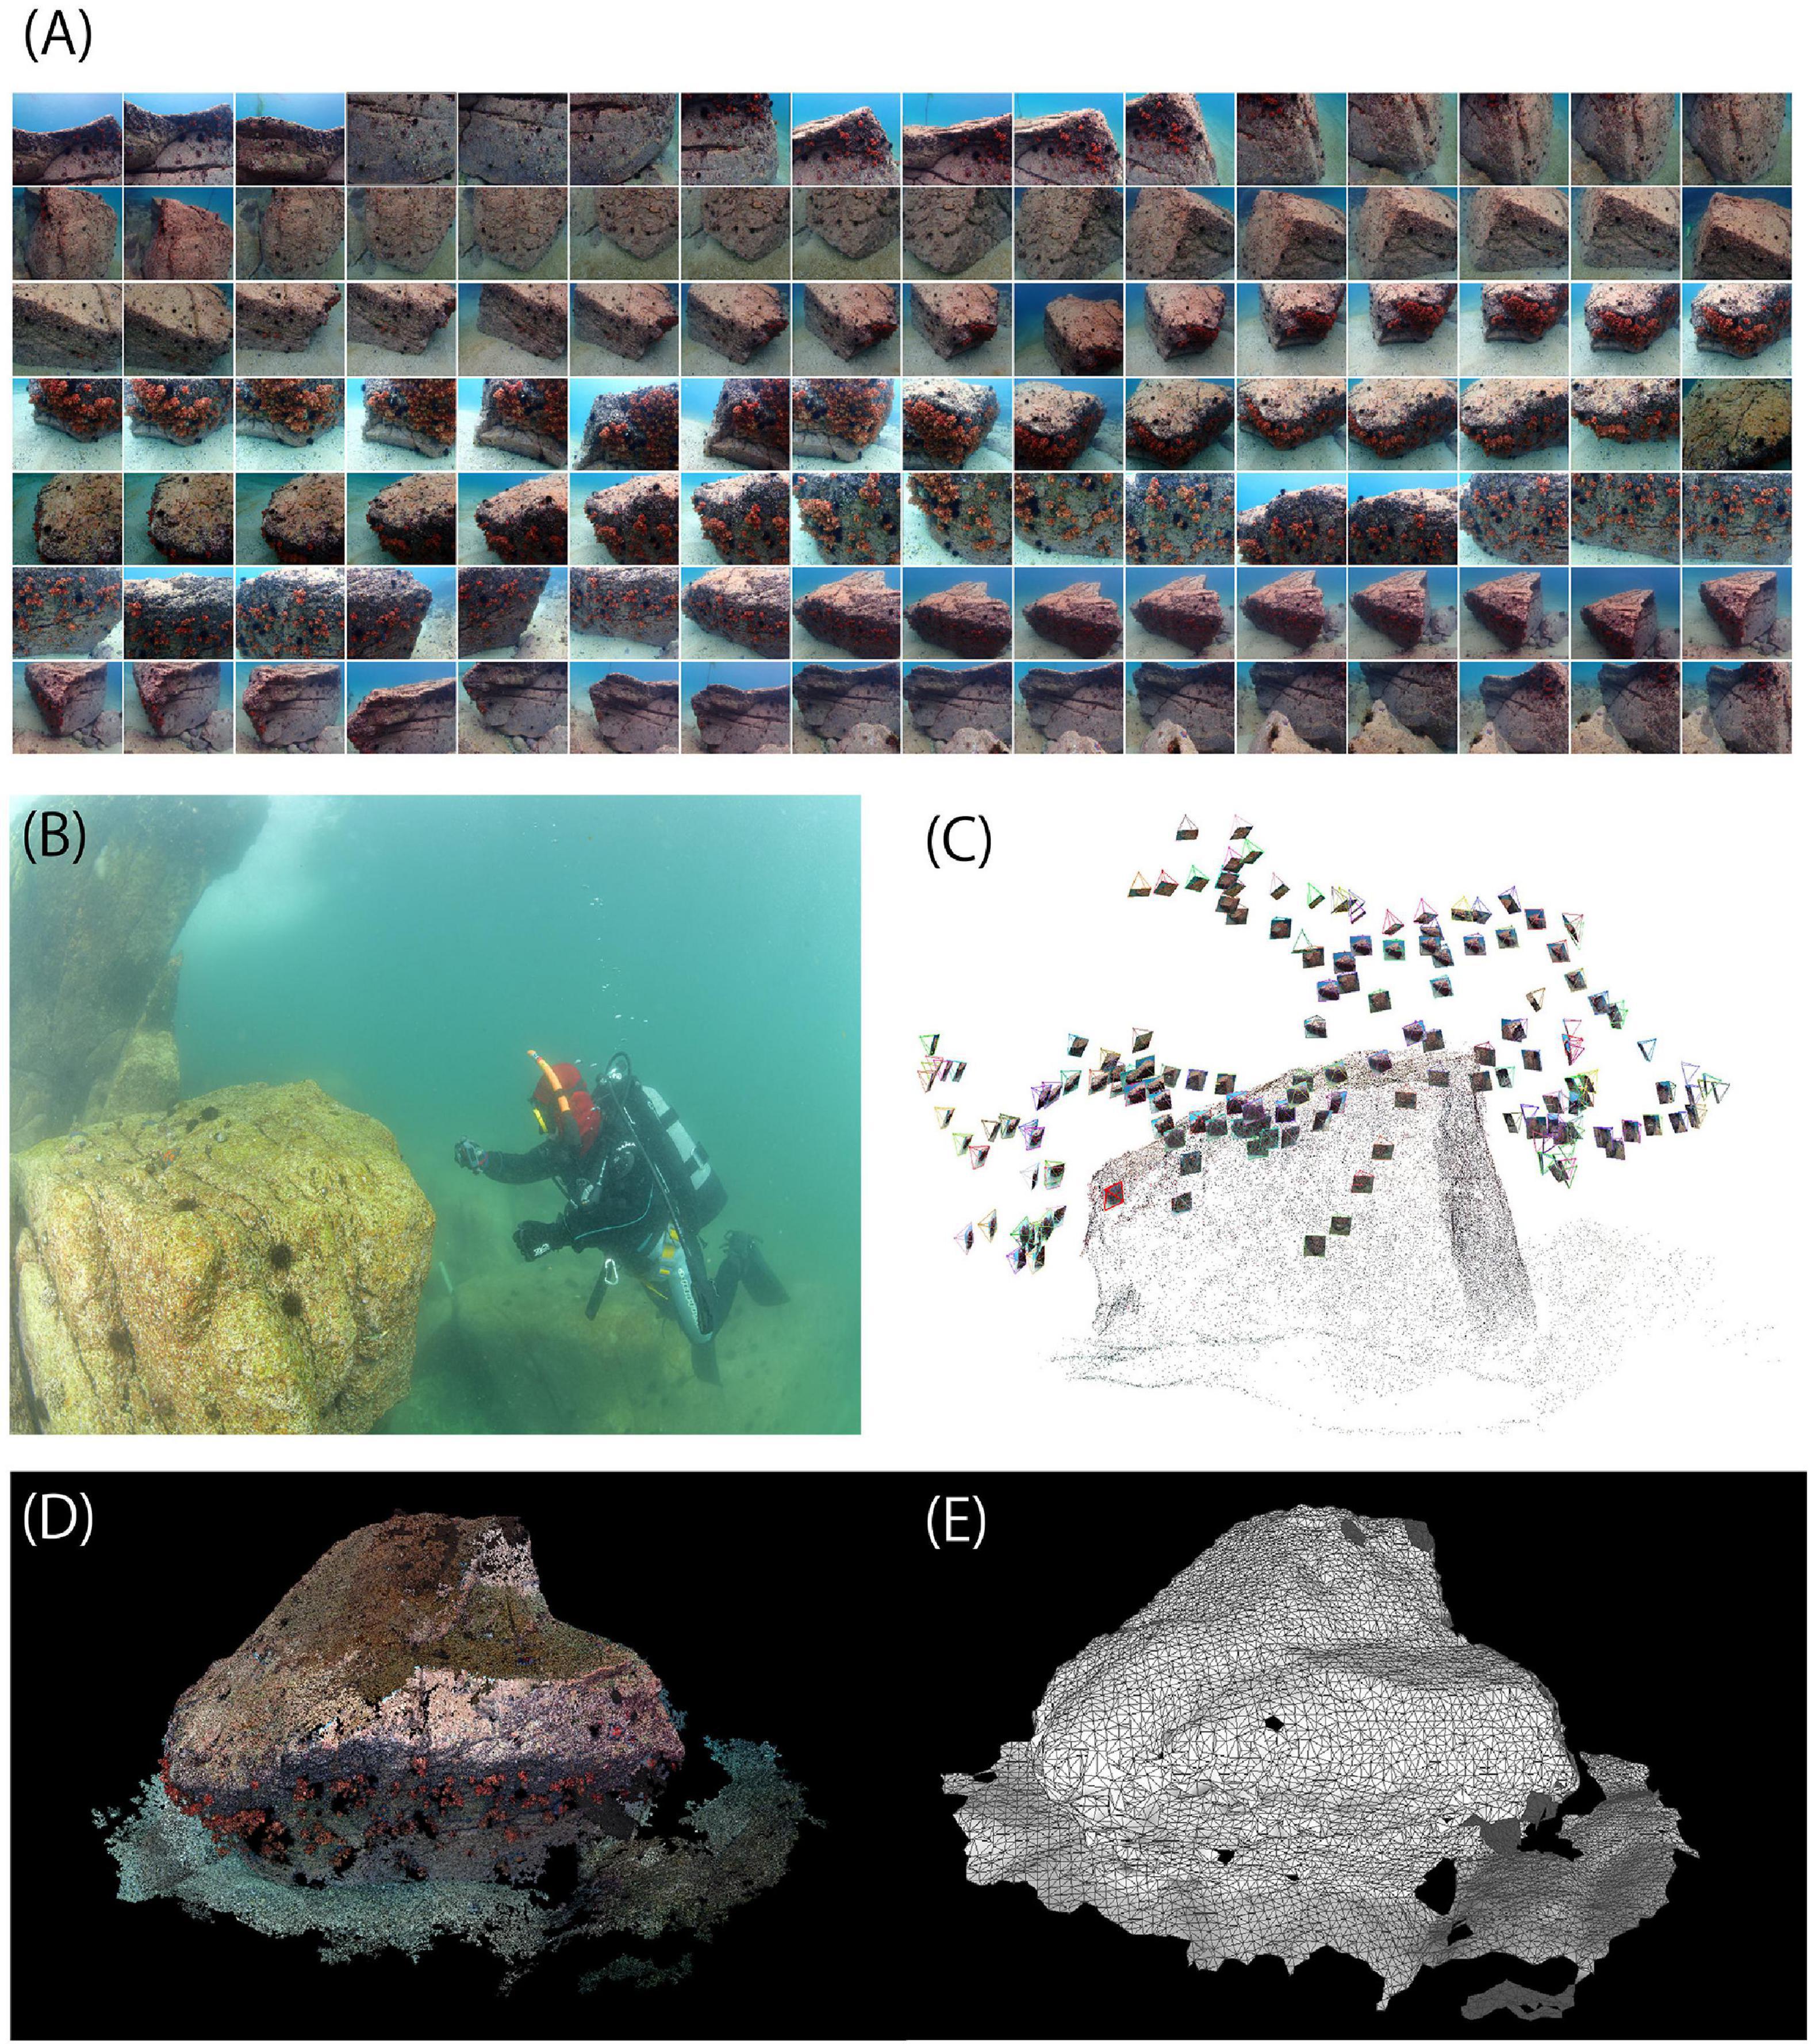 Frontiers | A New Method for Investigating Relationships Between  Distribution of Sessile Organisms and Multiple Terrain Variables by  Photogrammetry of Subtidal Bedrocks